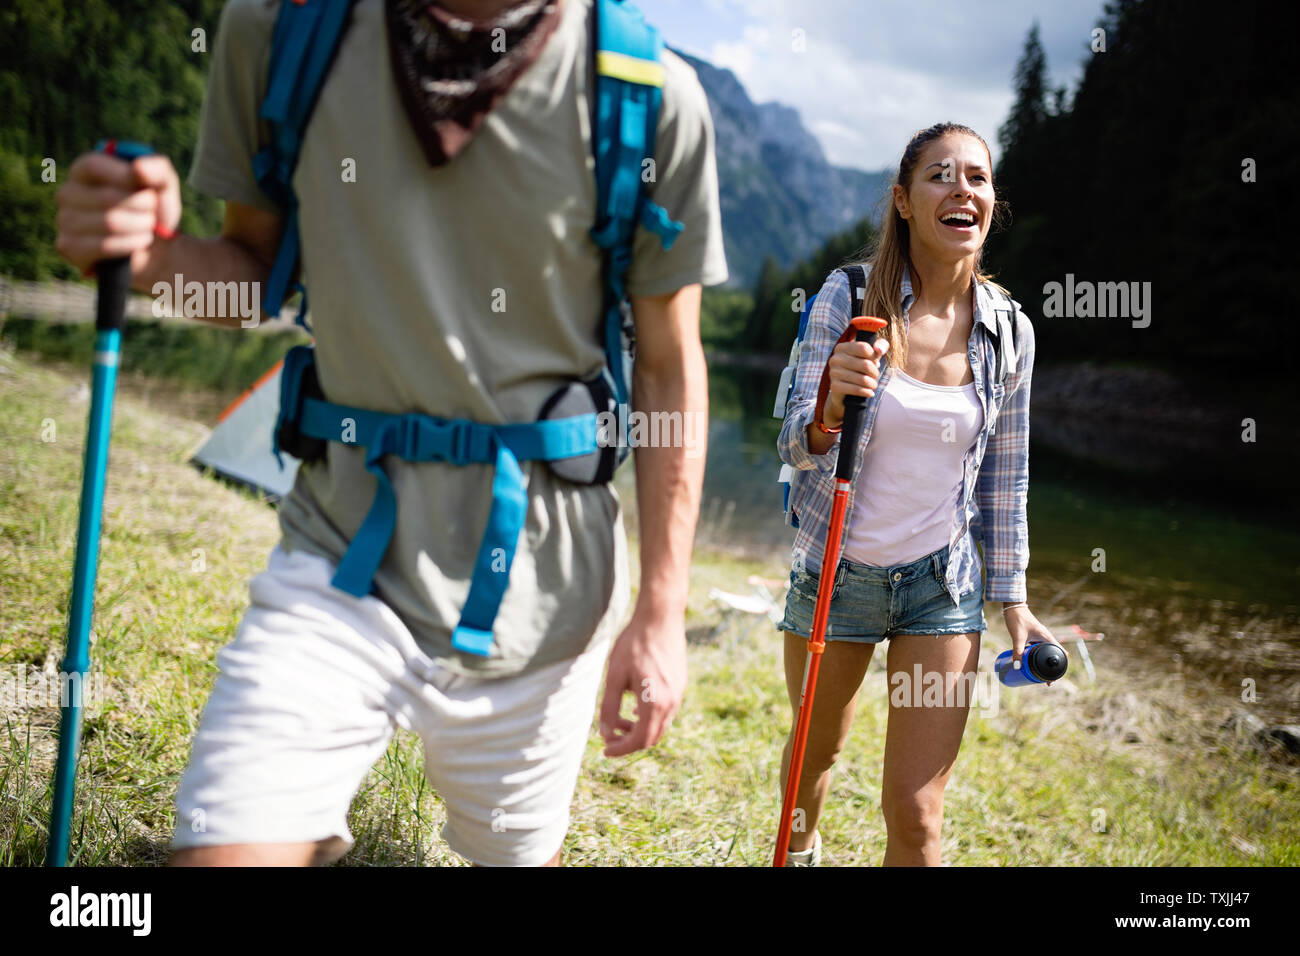 Woman with friends hiking in country side stock photo (154688